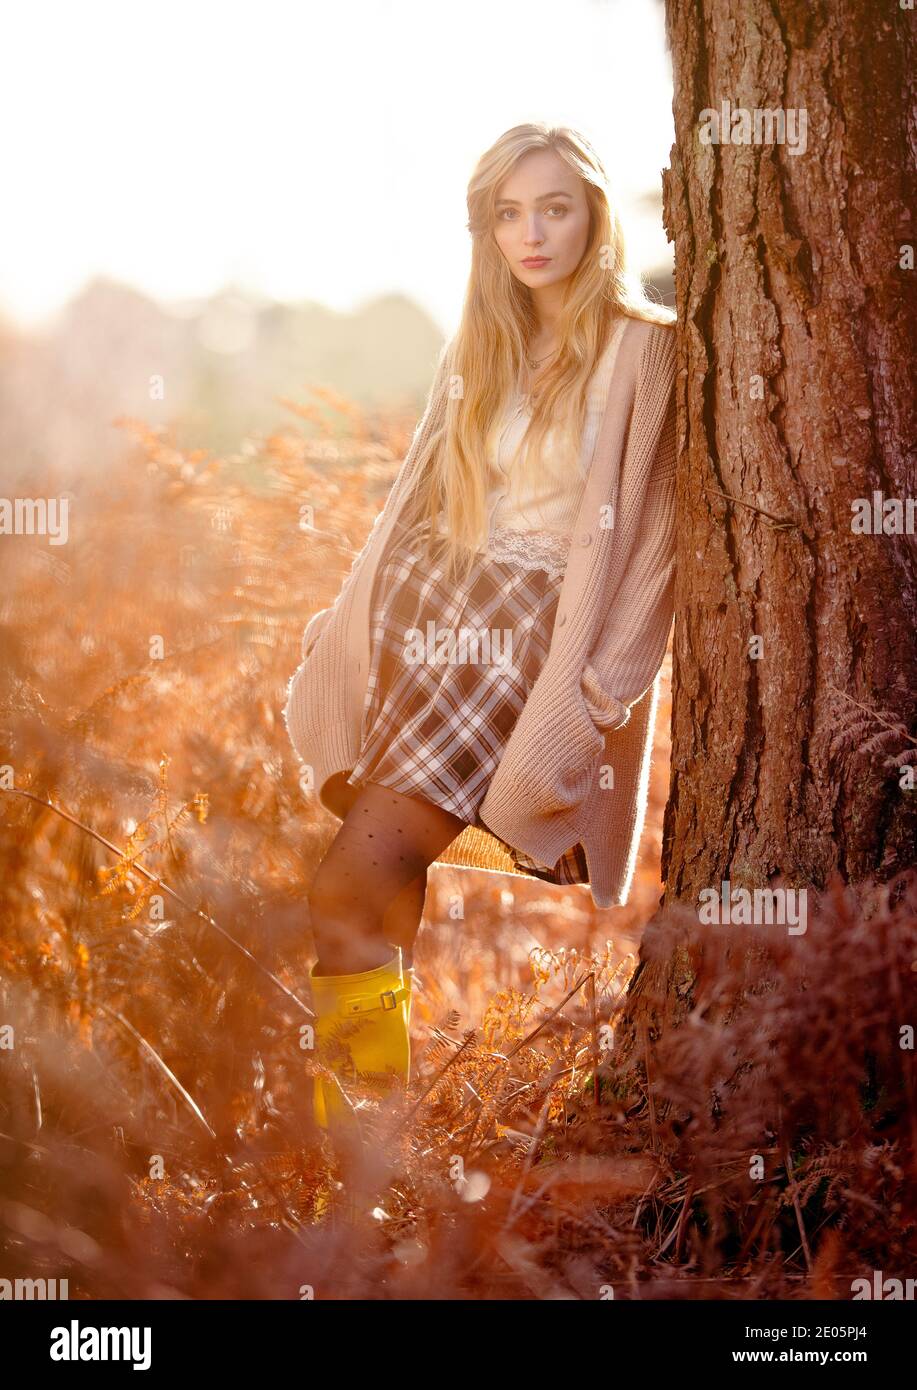 A young beautiful woman (20) dreamy editorial fashion shot in a warm autumnal forest setting wearing a cardigan and tartan skirt with long blonde hair Stock Photo